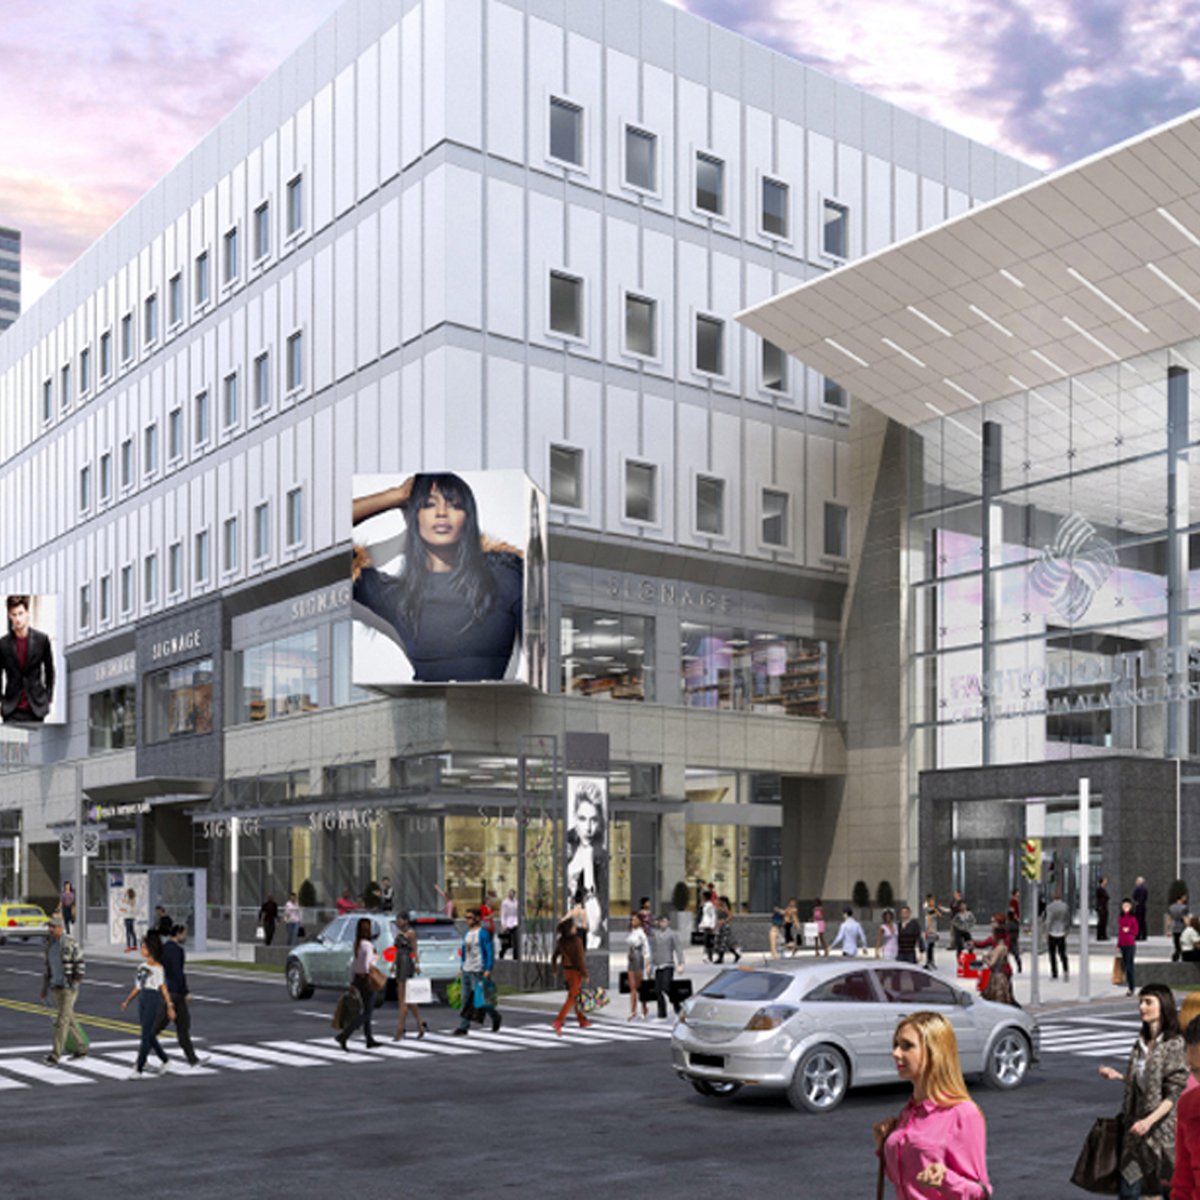 King of Prussia Mall won't be getting a Wayfair store and rooftop